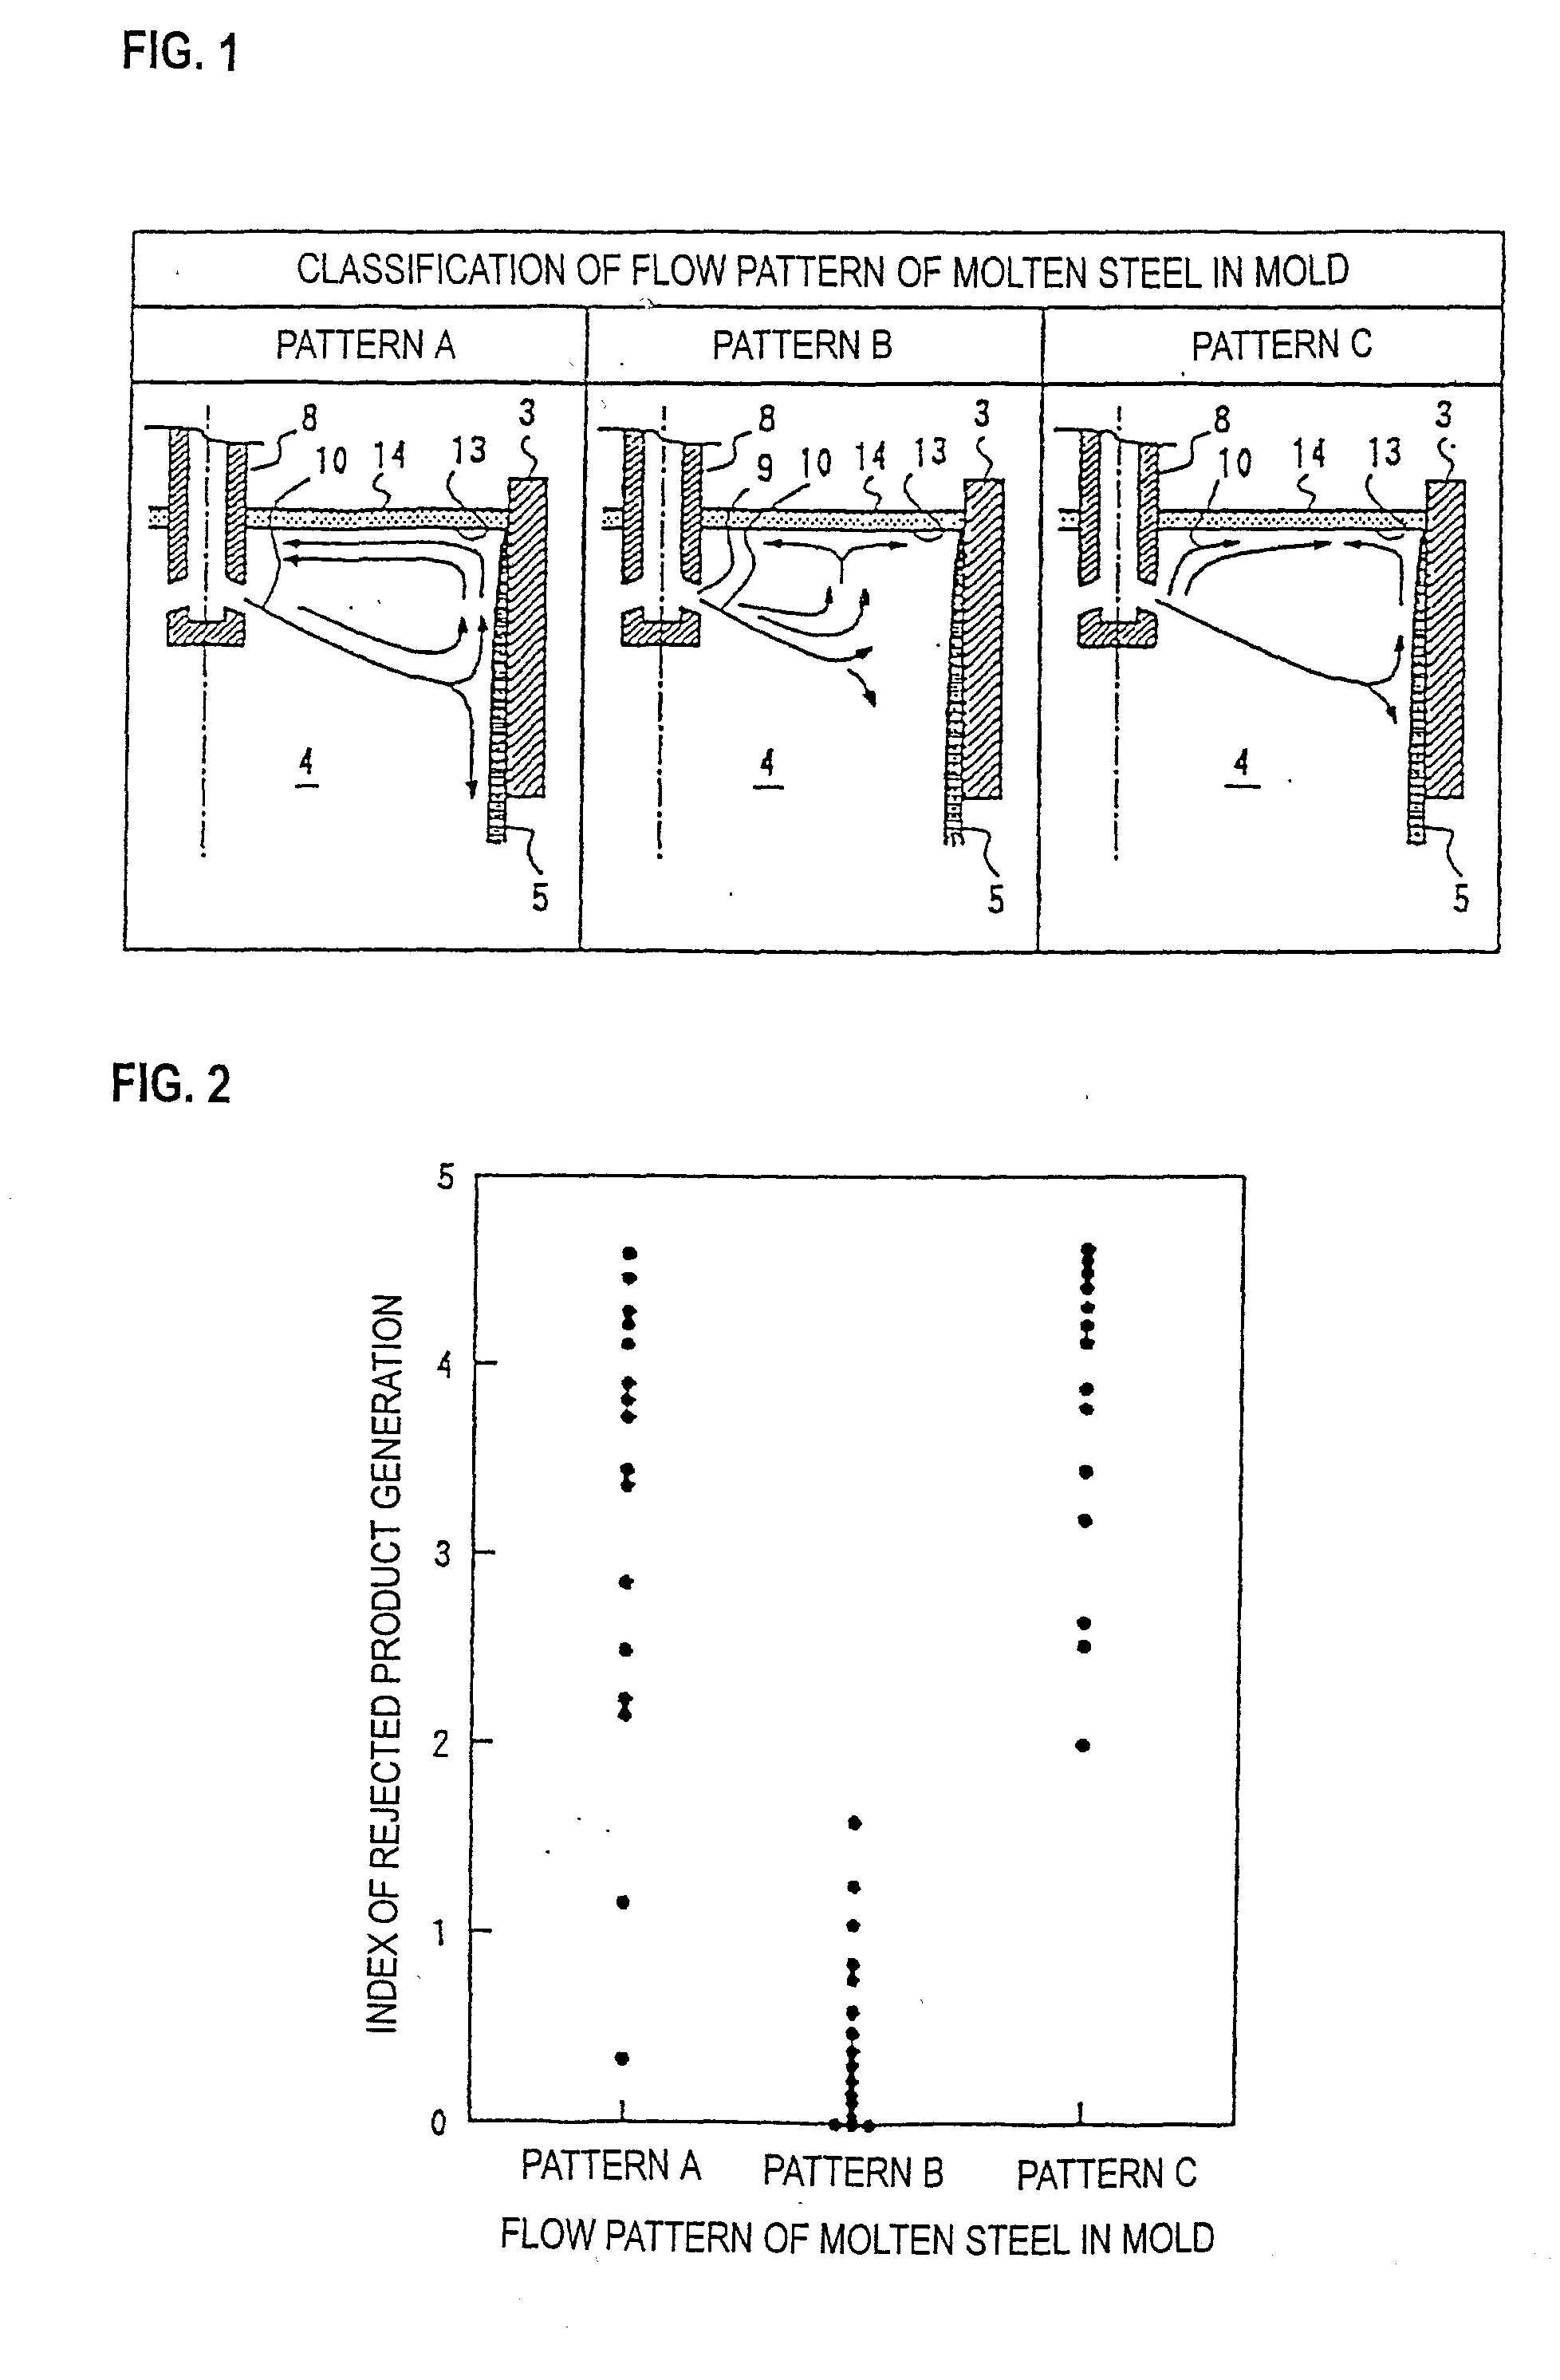 Method for estimating and controlling flow pattern of molten steel in continuous casting and apparatus therefor